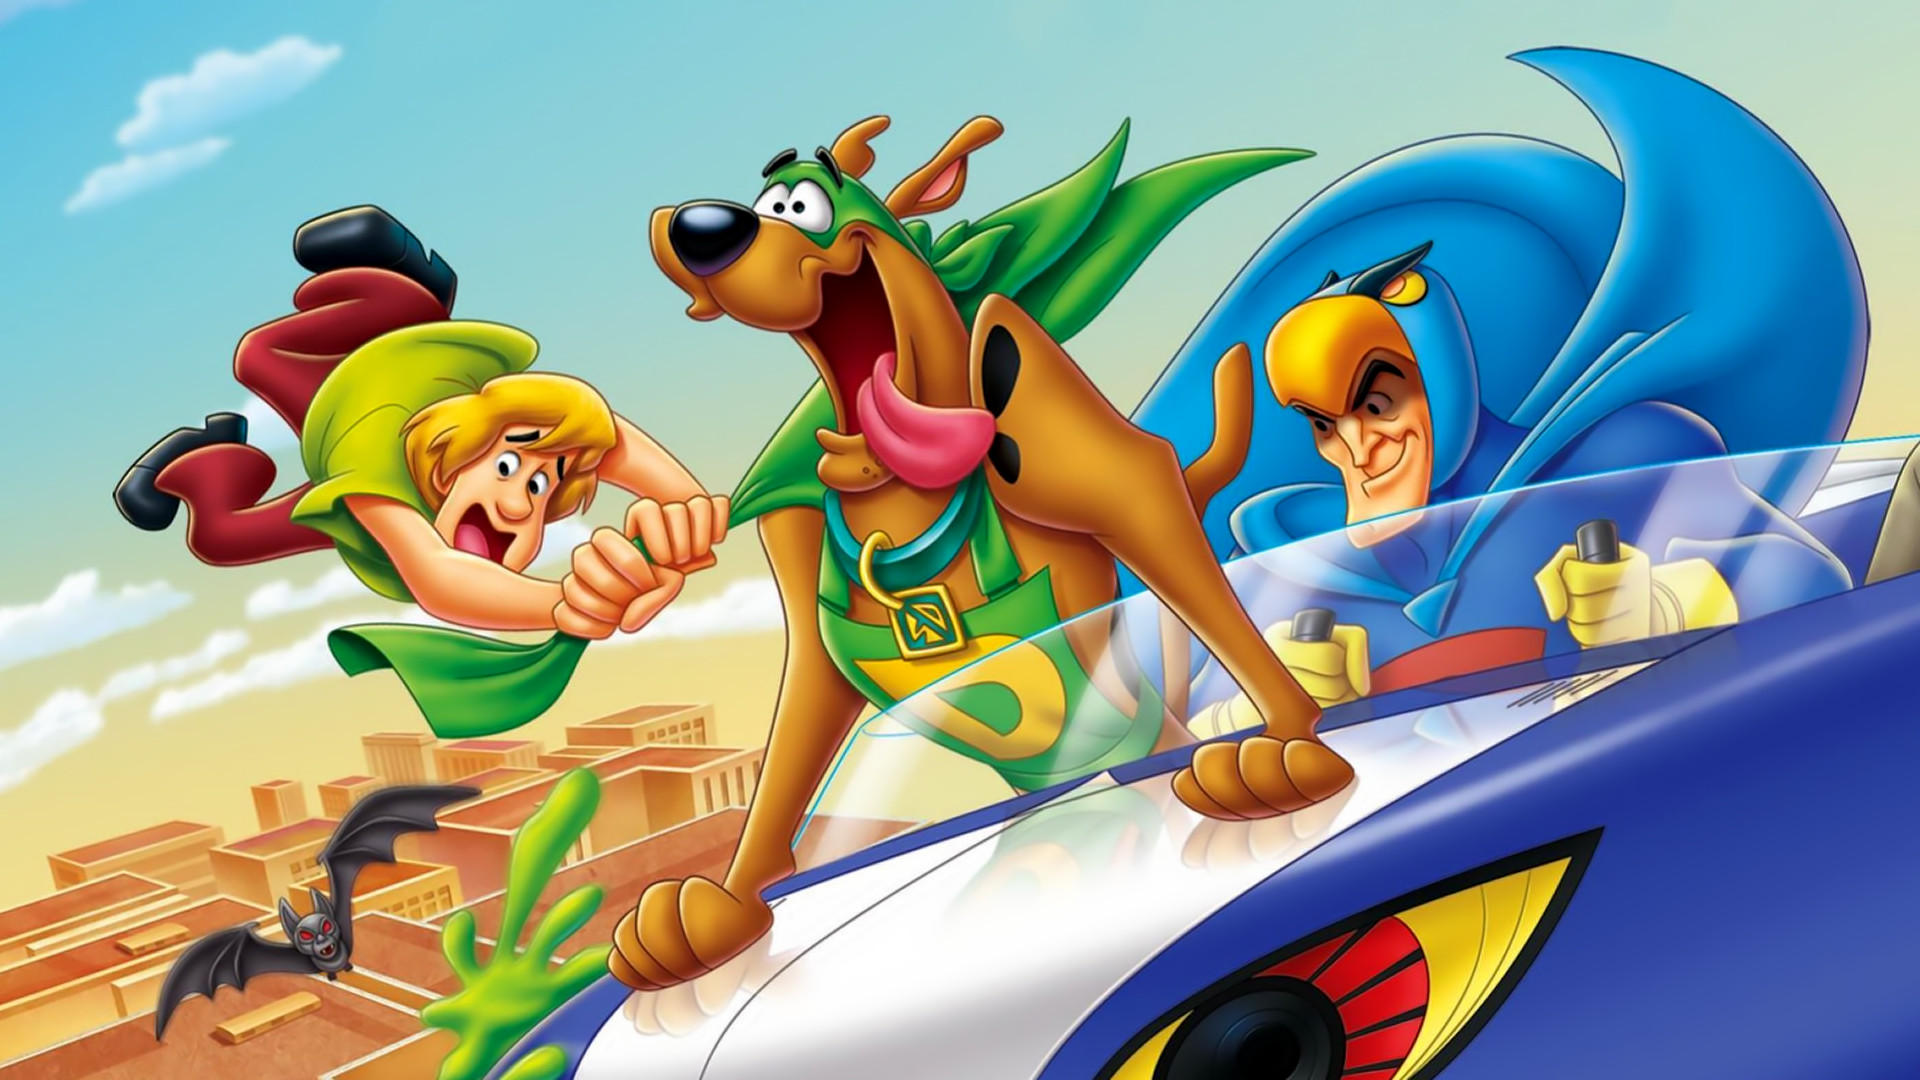 scooby doo hd bike desktop wallpaper 19201080  Free Phone Wallpapers For  Mobile Cell Backgrounds